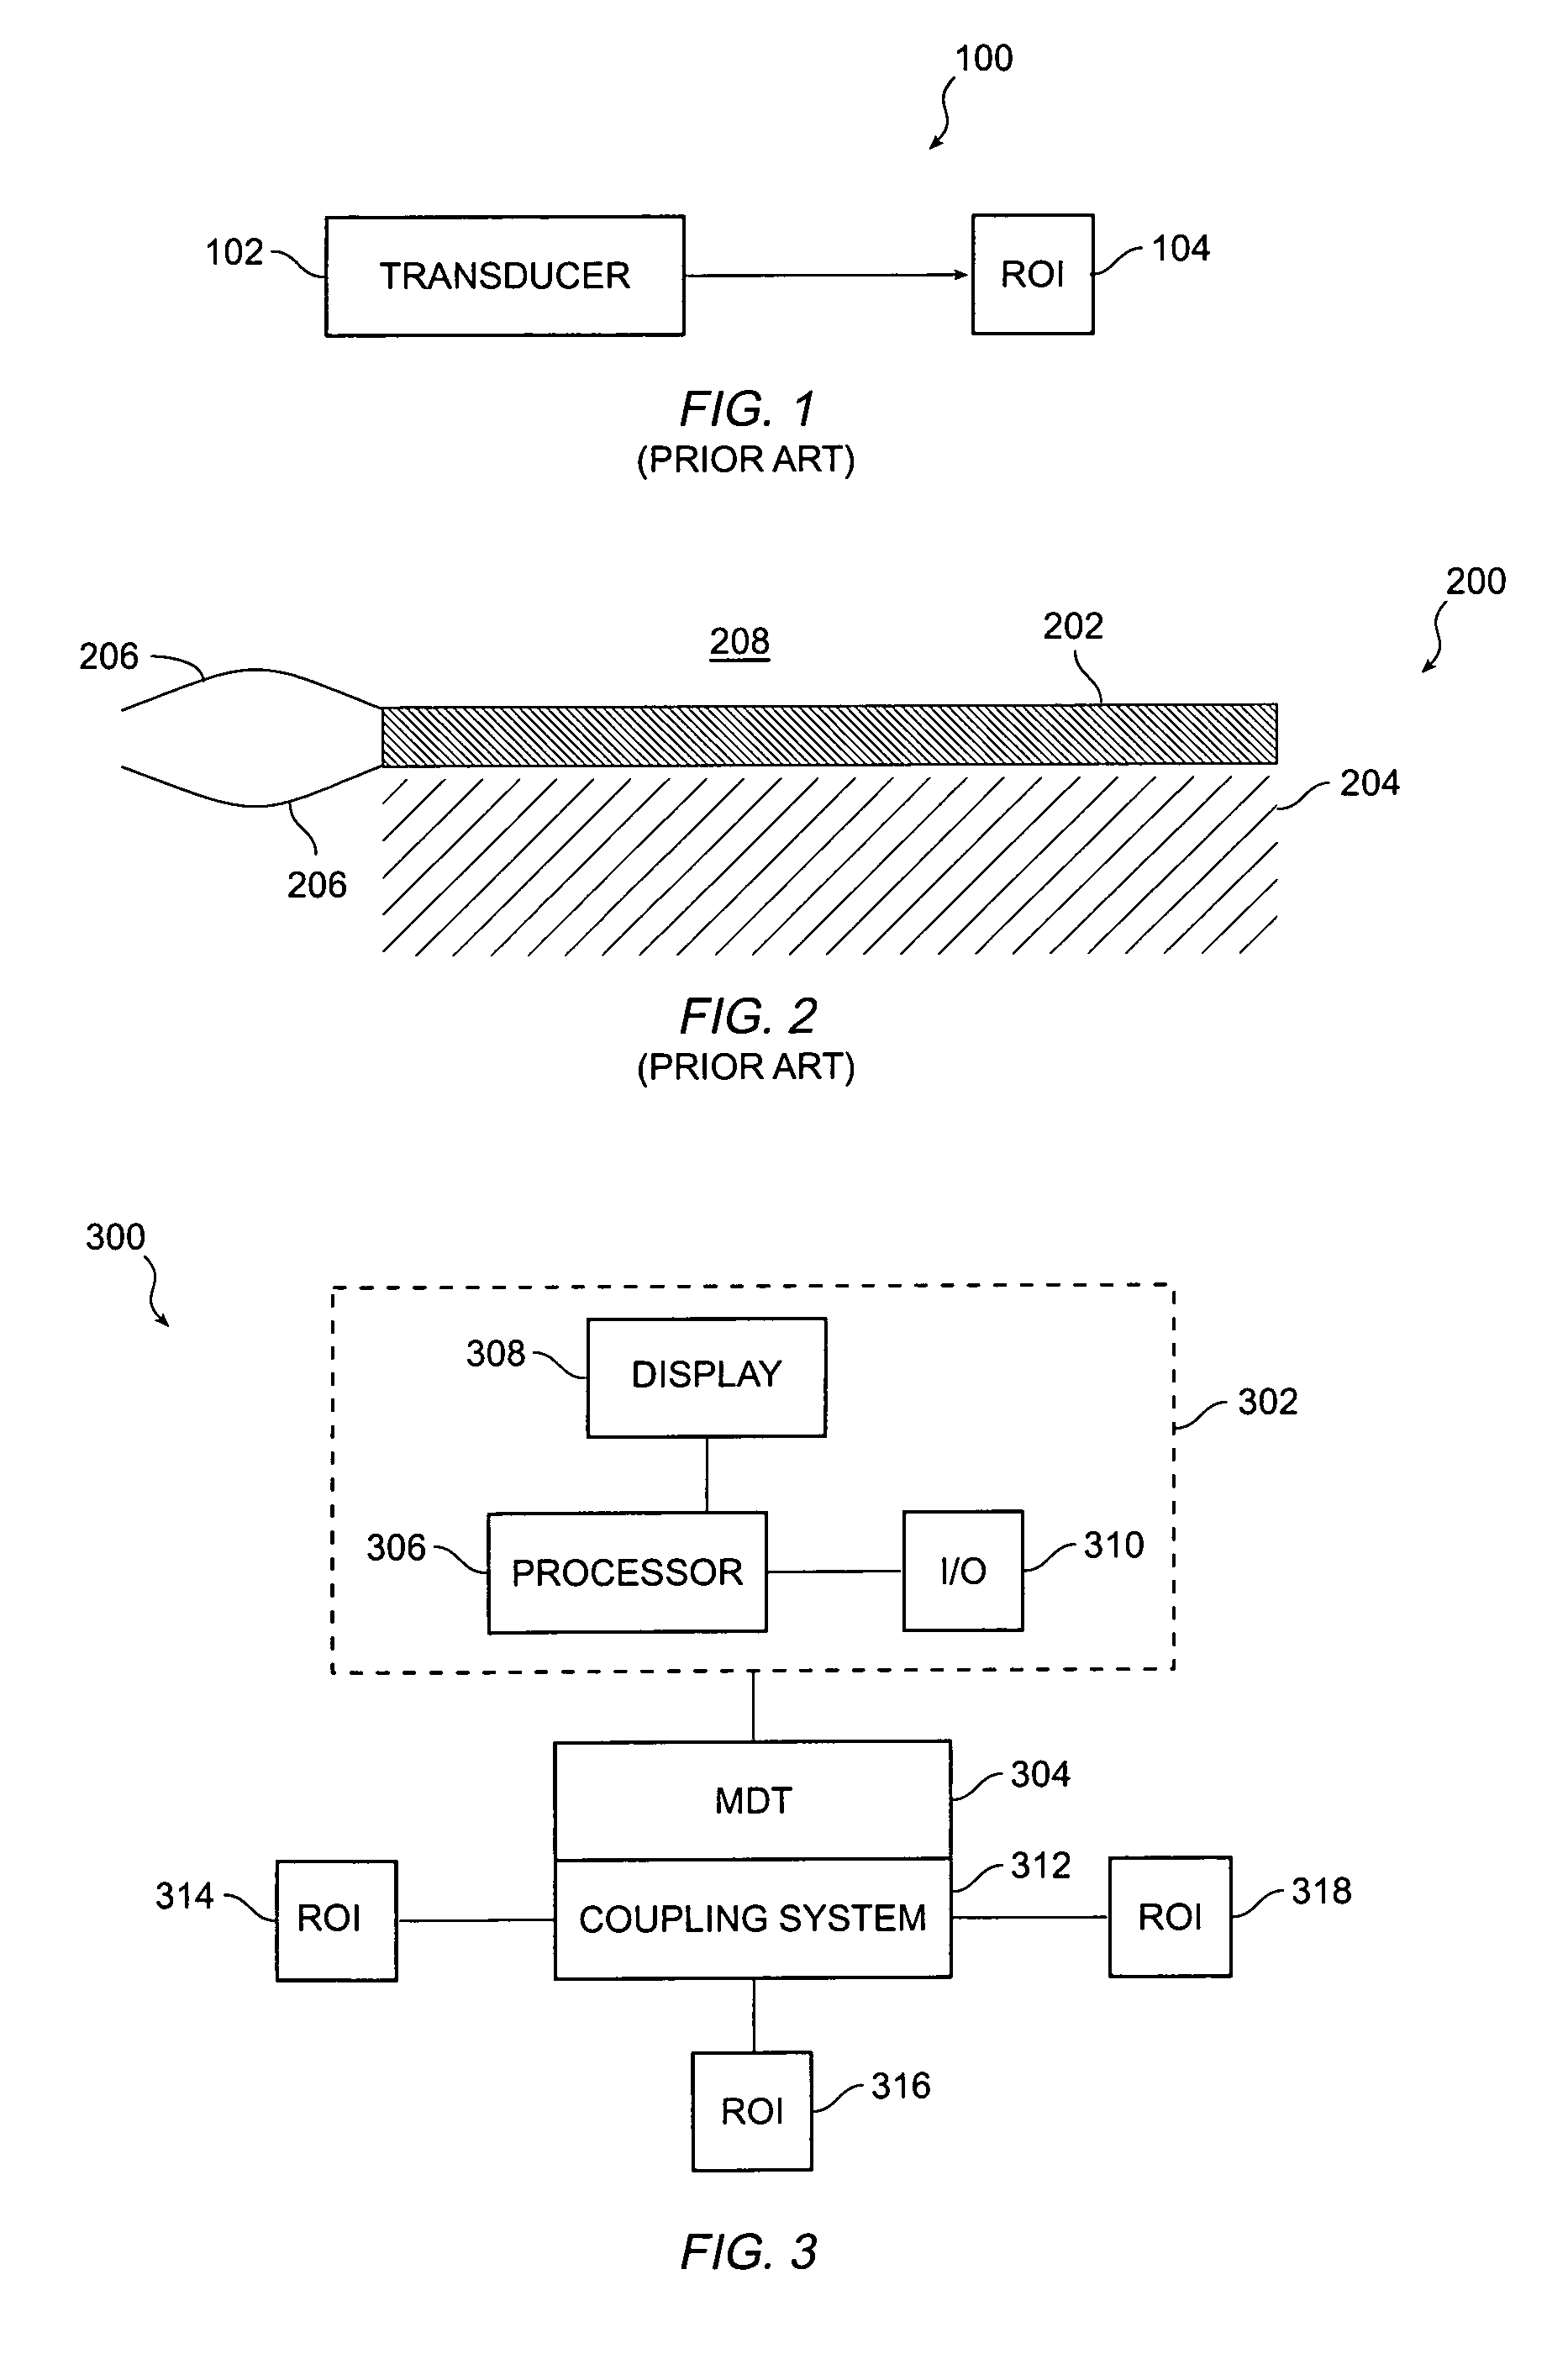 Method and system for ultrasound treatment with a multi-directional transducer